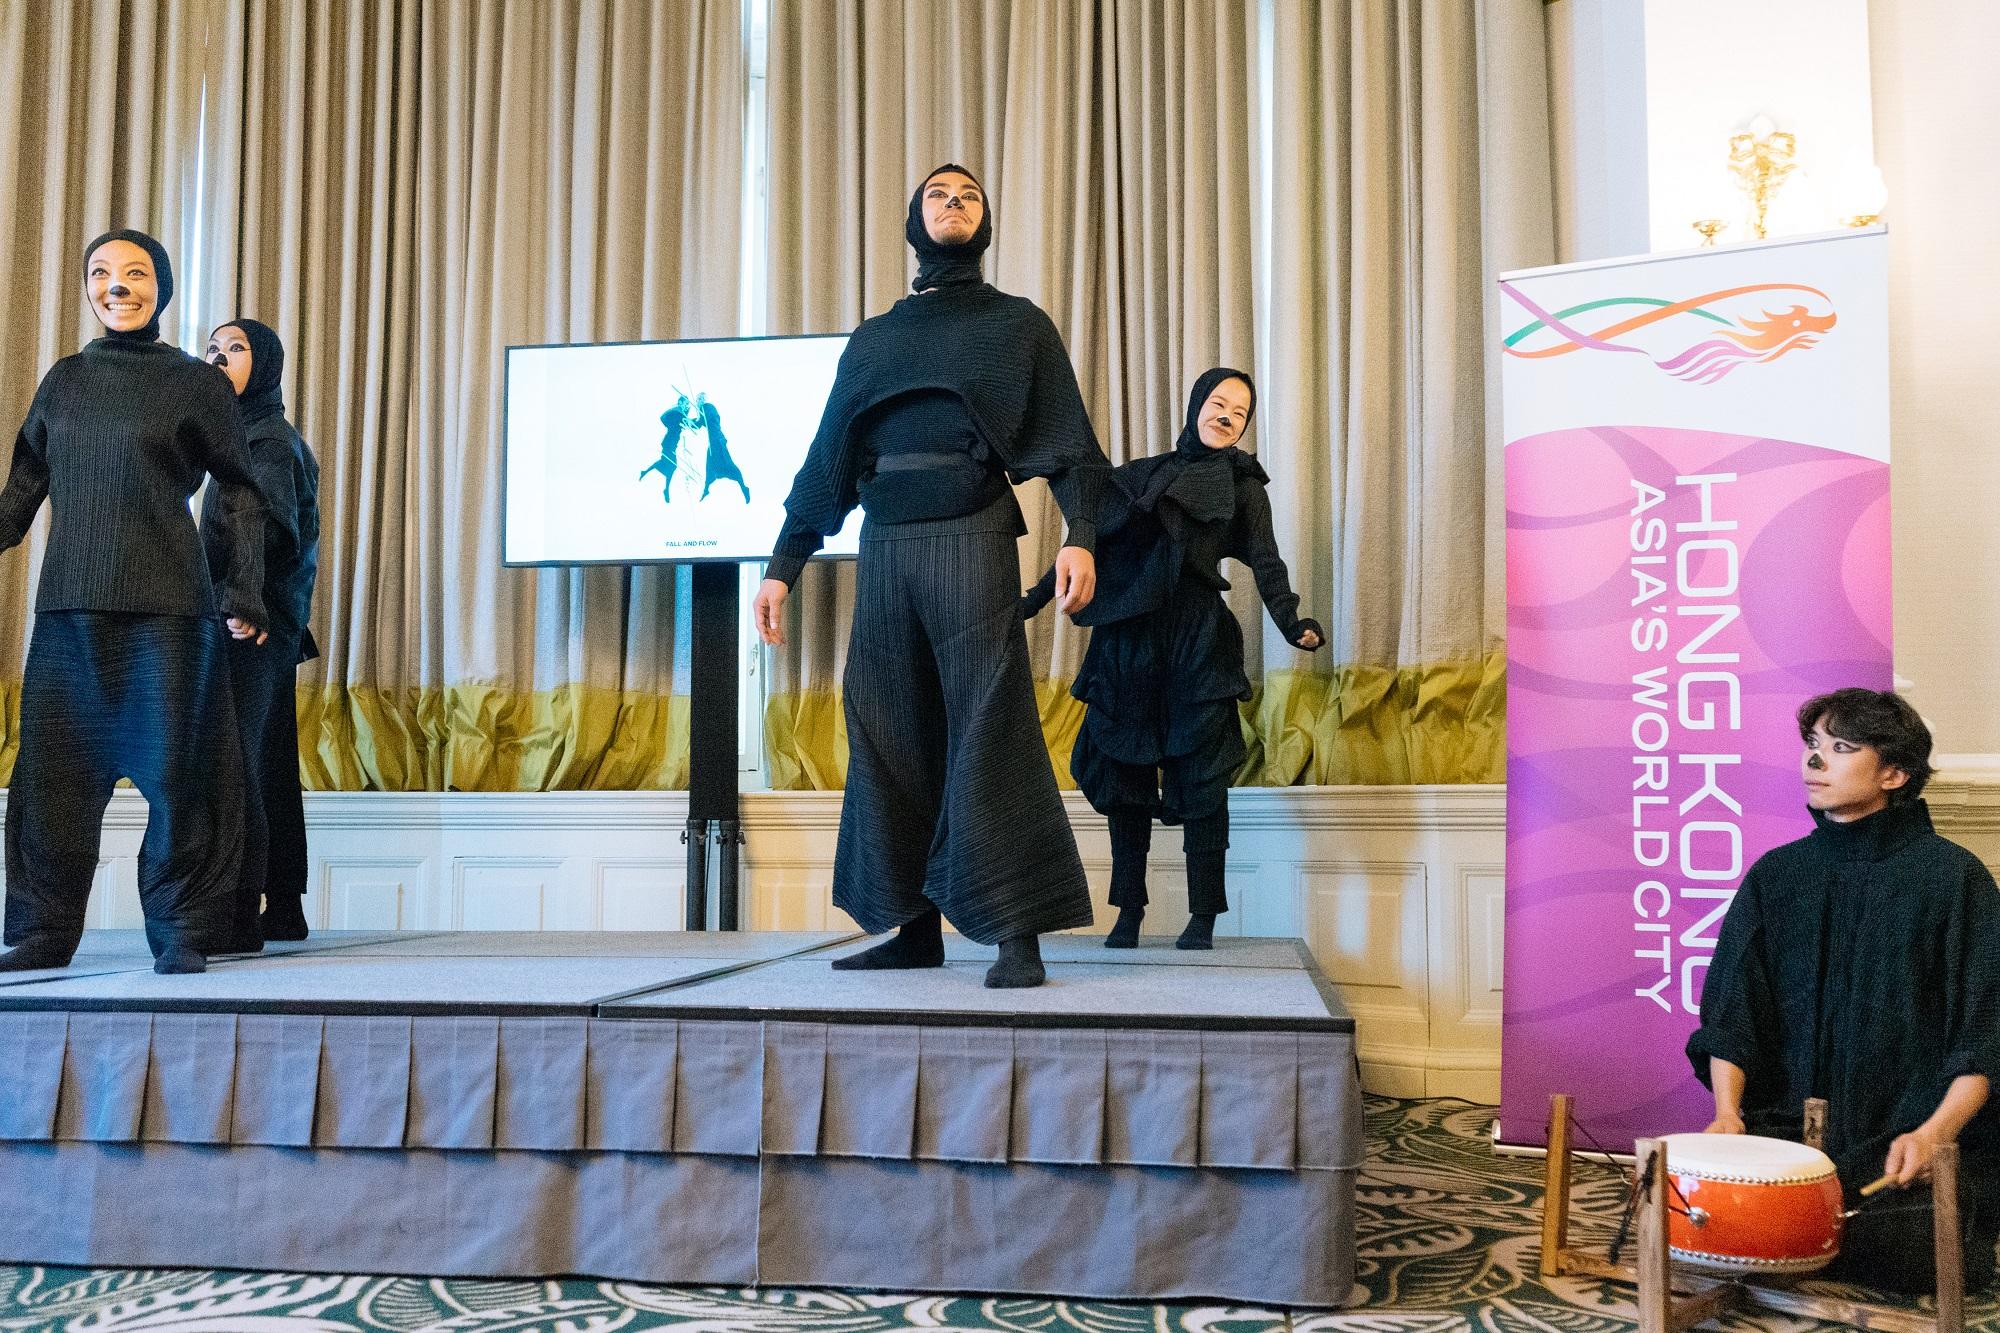 The Hong Kong Economic and Trade Office, London (London ETO) hosted a networking reception in Edinburgh, United Kingdom (UK), on August 8 (London time) evening, in celebrating the participation of Hong Kong performance art groups in the Edinburgh Festival Fringe. Photo shows the excerpt of the performance of Théâtre de la Feuille.